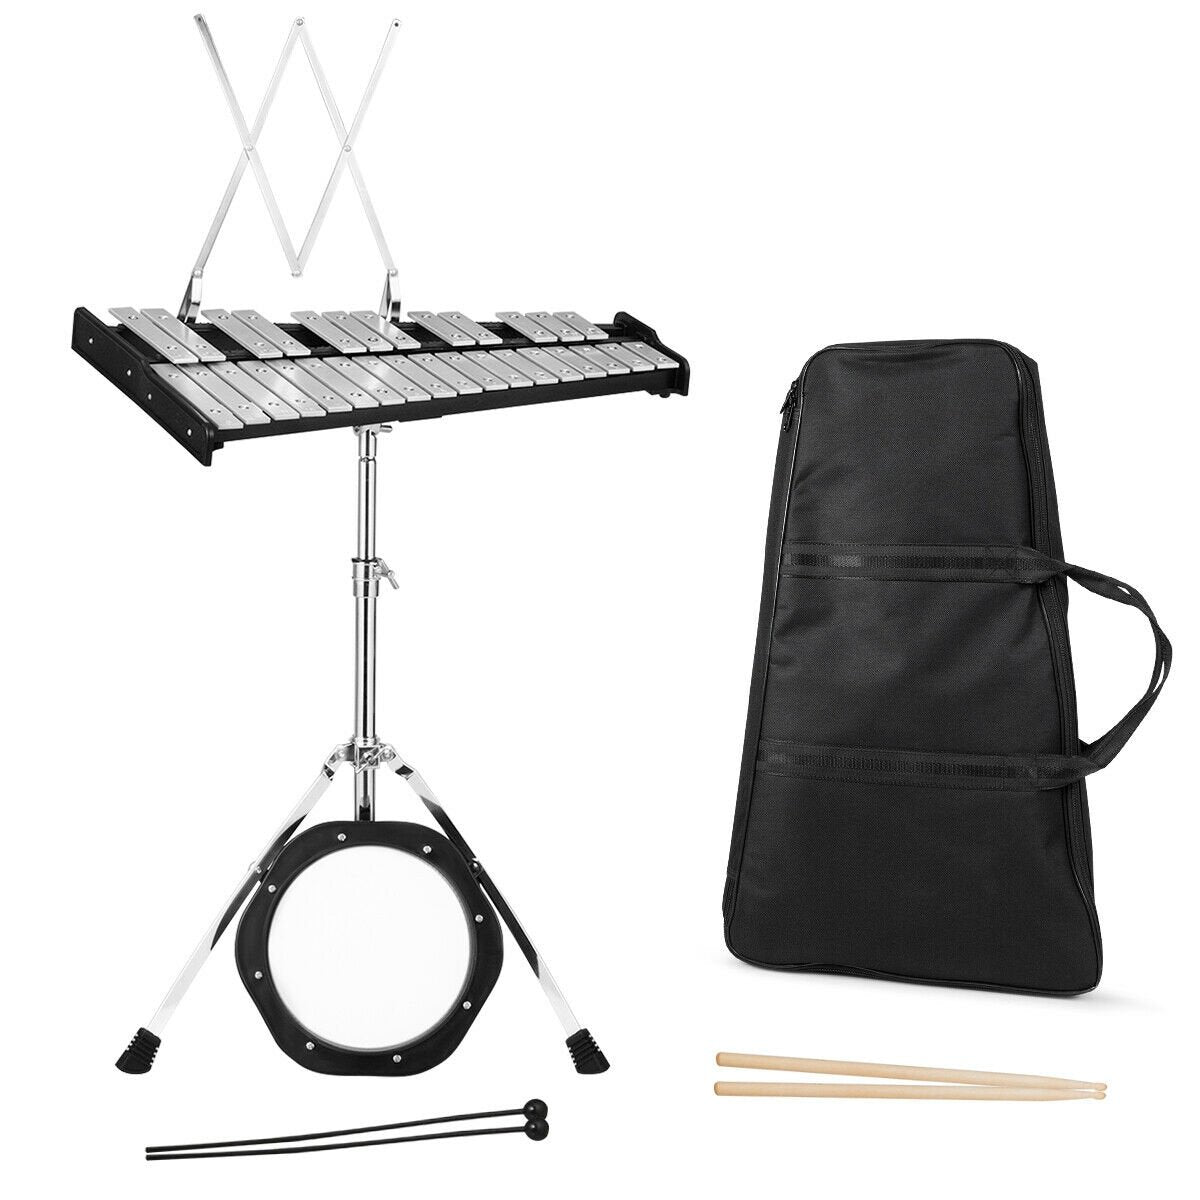 30 Notes Percussion with Practice Pad Mallets Sticks Stand, Black